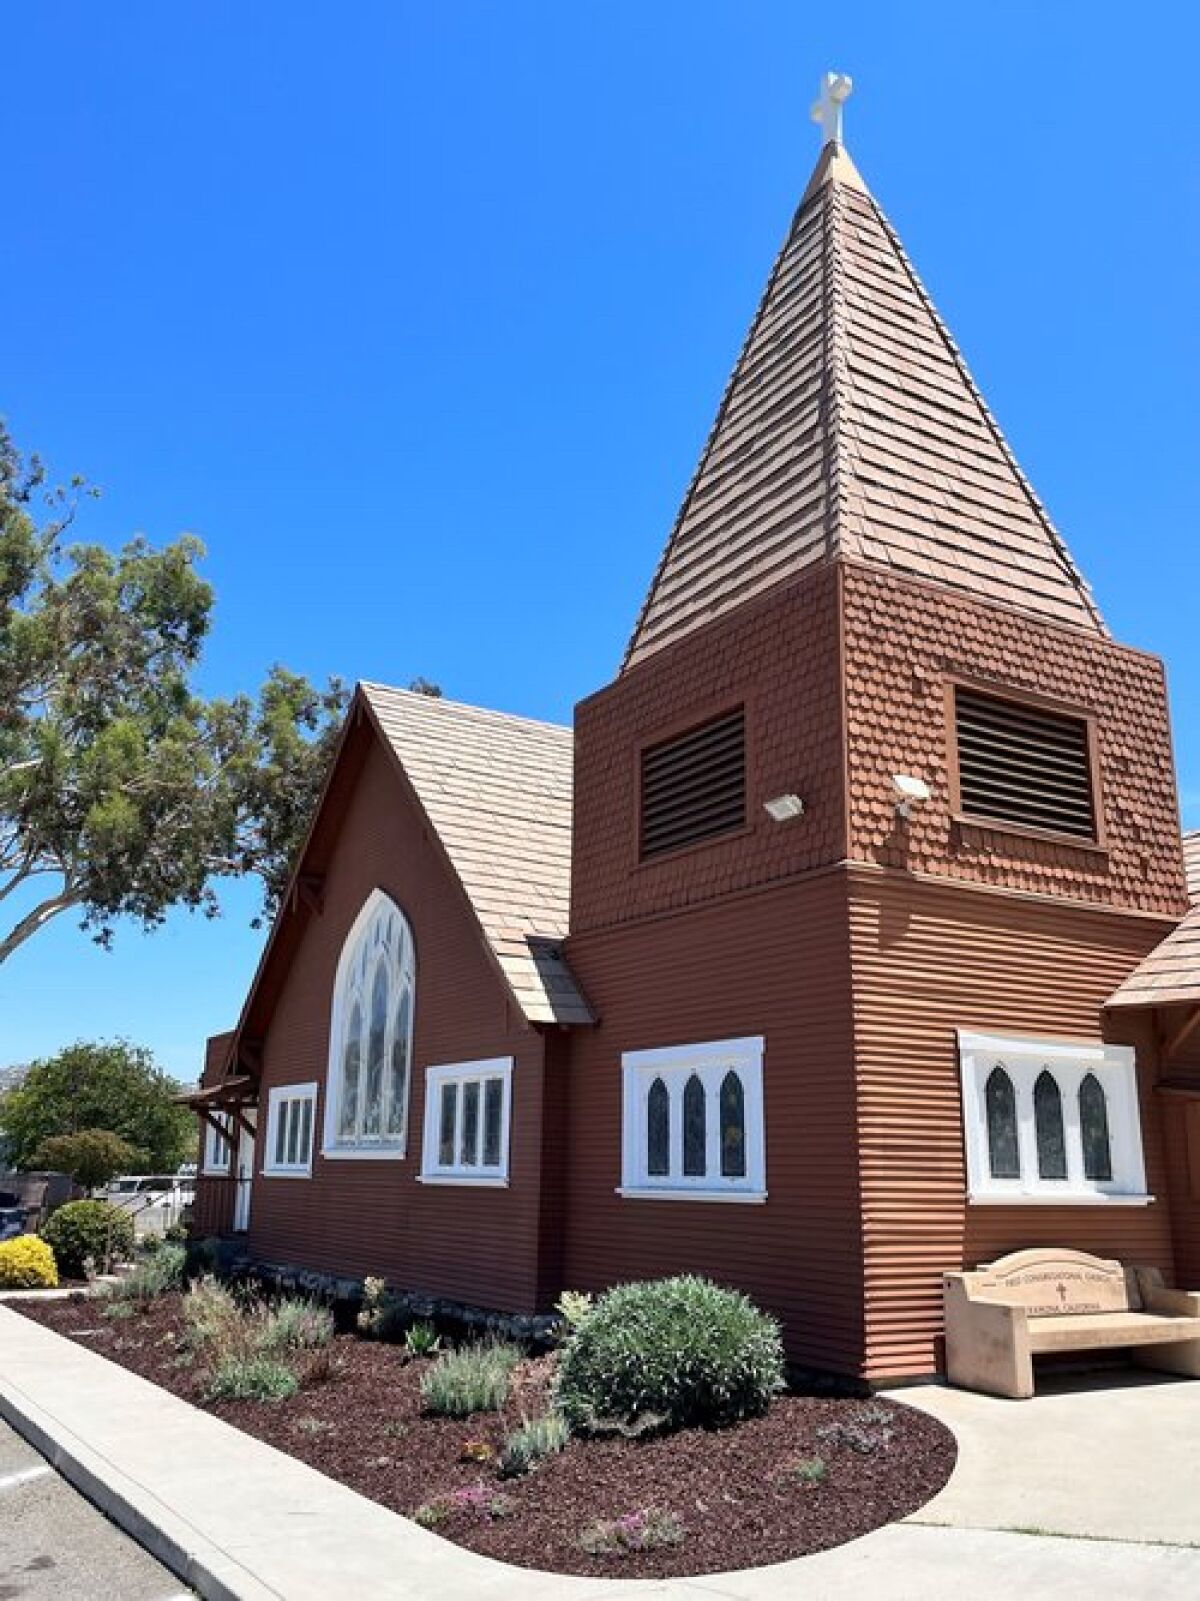 The First Congregational Church of Ramona is celebrating its 125th anniversary this year.